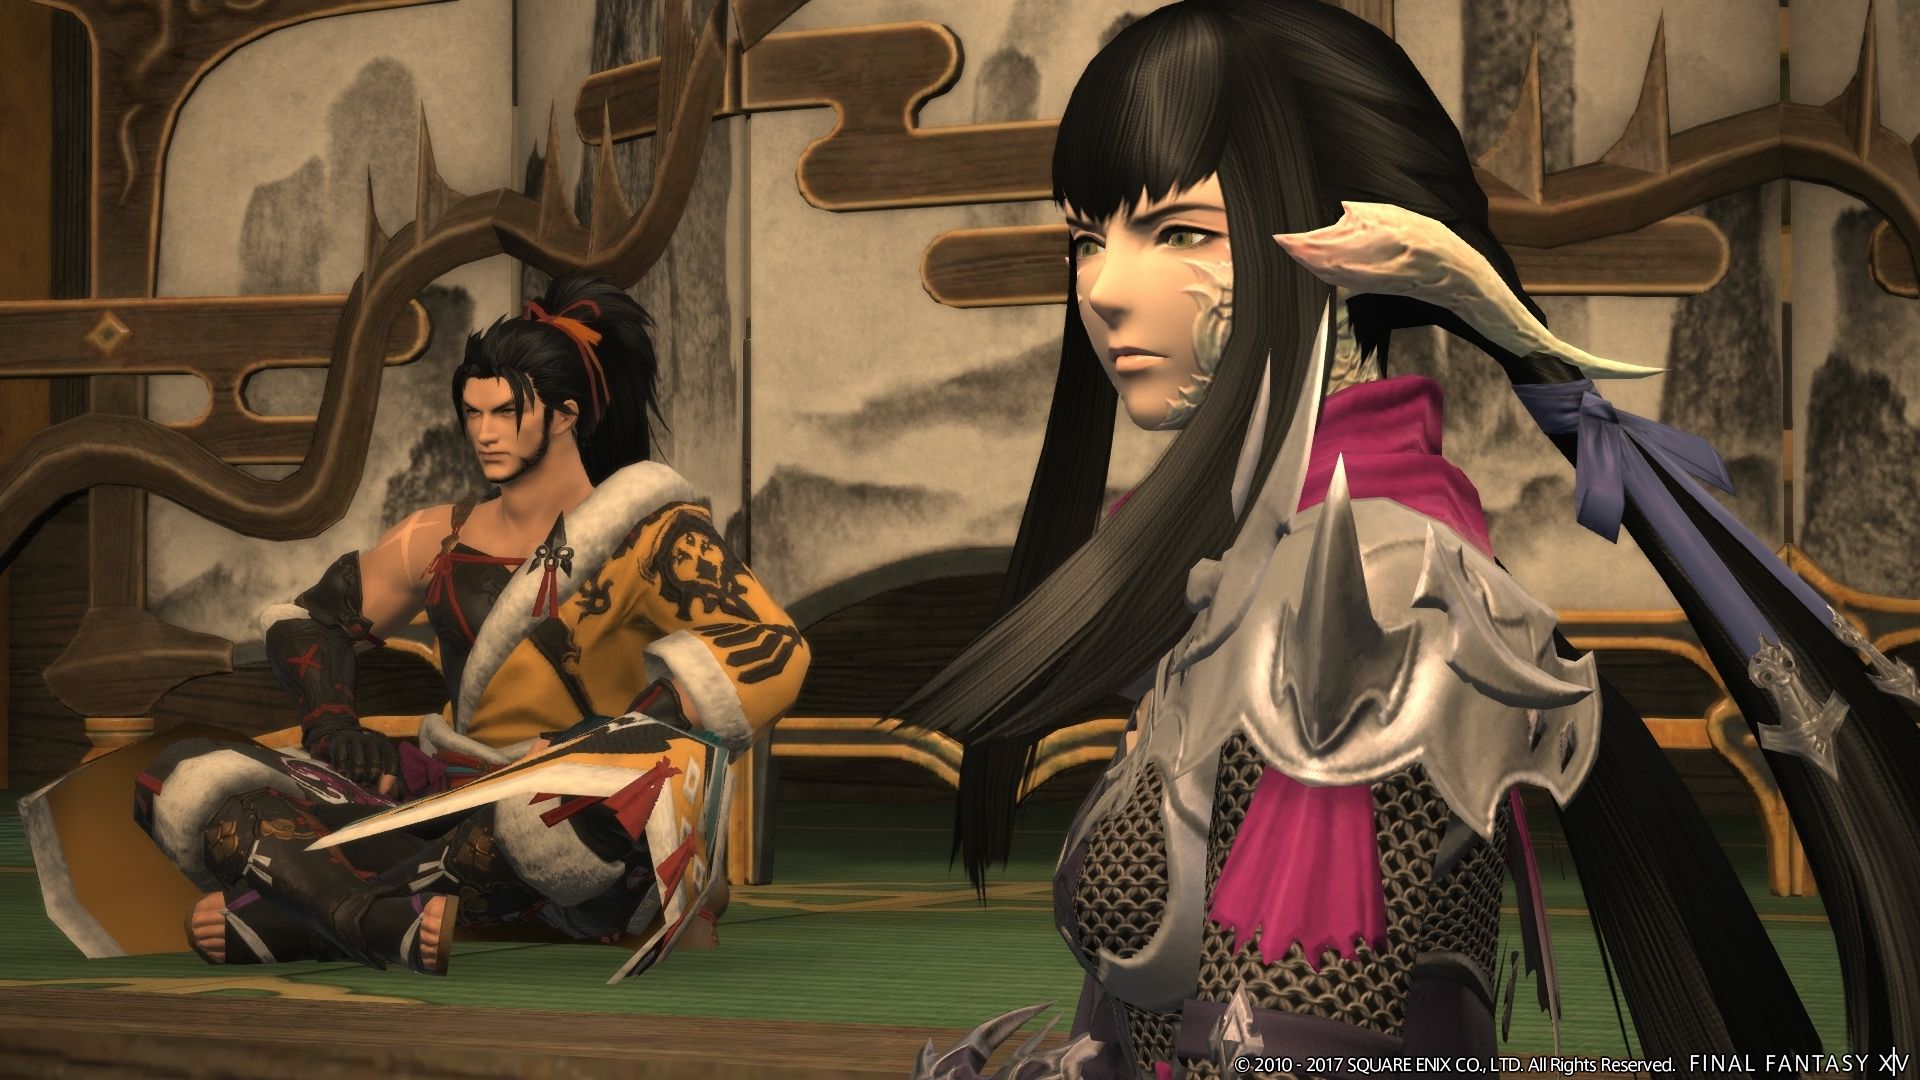 Final Fantasy Xiv Shows Update 4 2 With New 1080p Screenshots Of Story And Byakko Battle